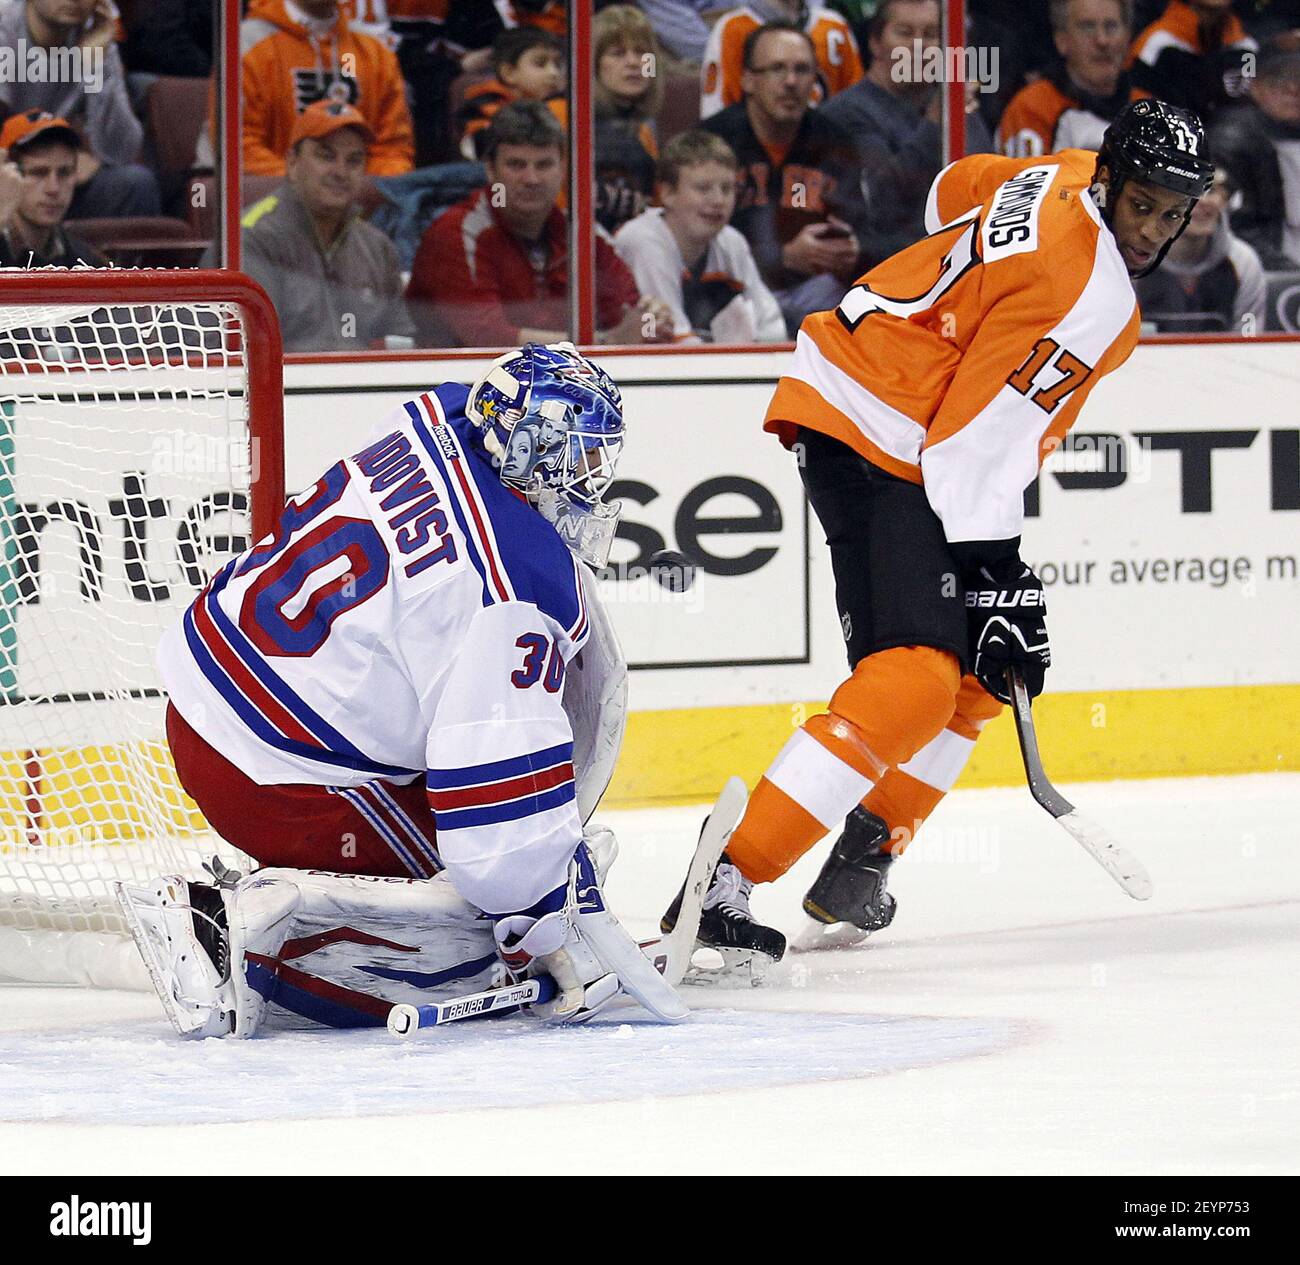 January 24, 2013: New York Rangers goalie Henrik Lundqvist (30) with the  glove save during the NHL game between the New York Rangers and  Philadelphia Flyers at Well Fargo Center in Philadelphia